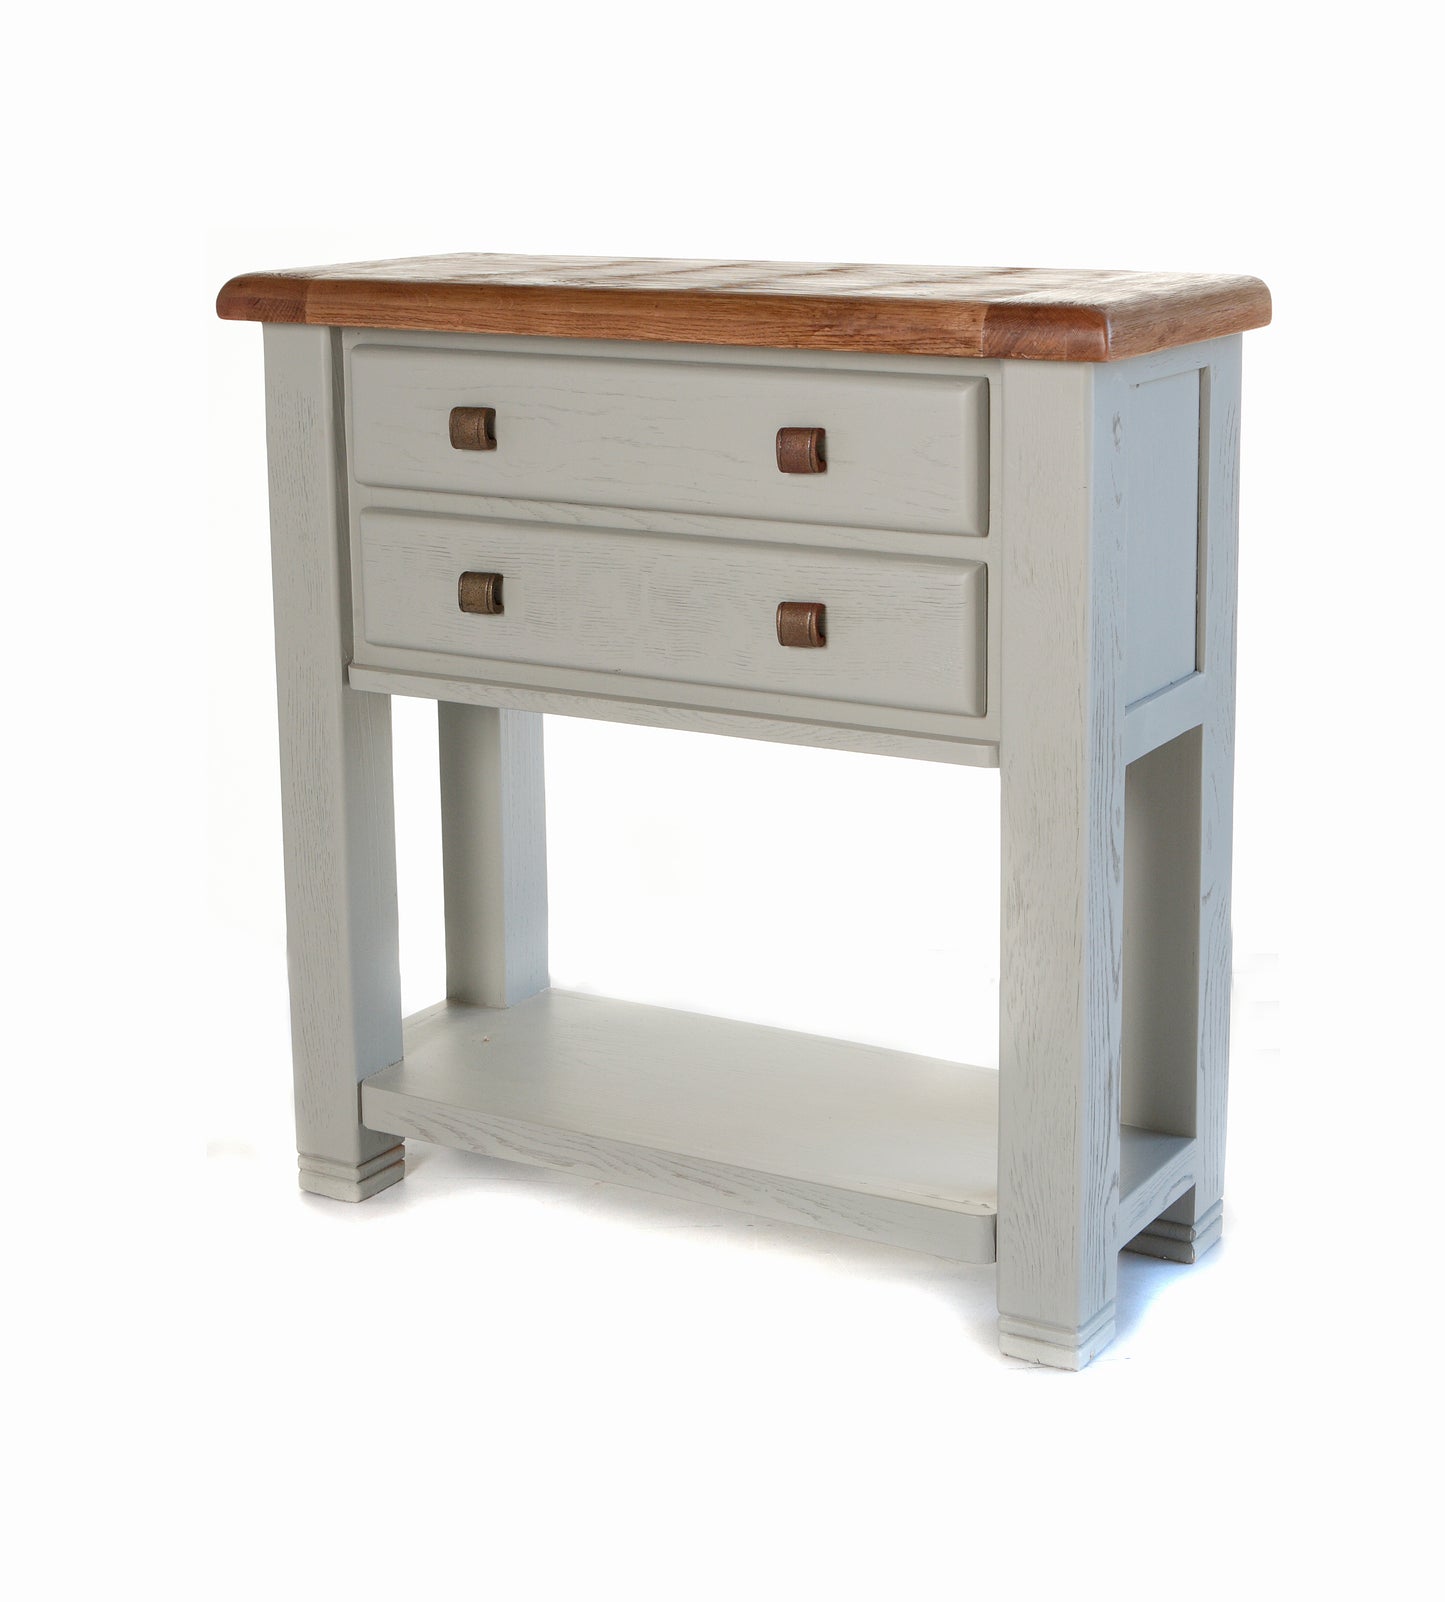 Danube Oak Console Table painted French Grey